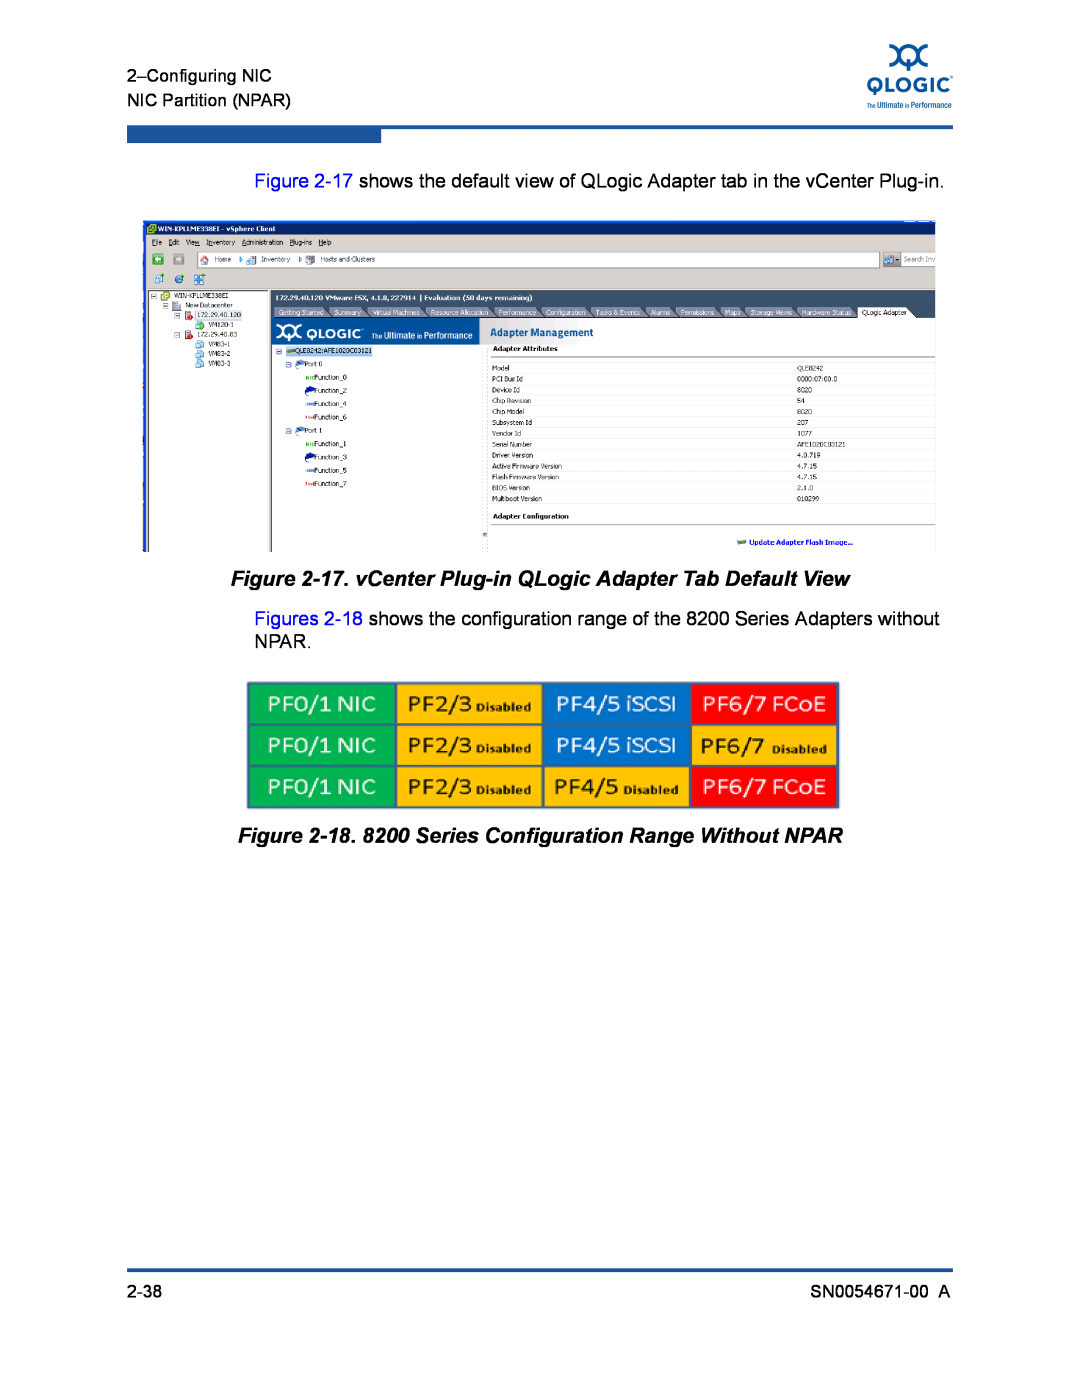 Q-Logic 3200 17. vCenter Plug-in QLogic Adapter Tab Default View, 18. 8200 Series Configuration Range Without NPAR 